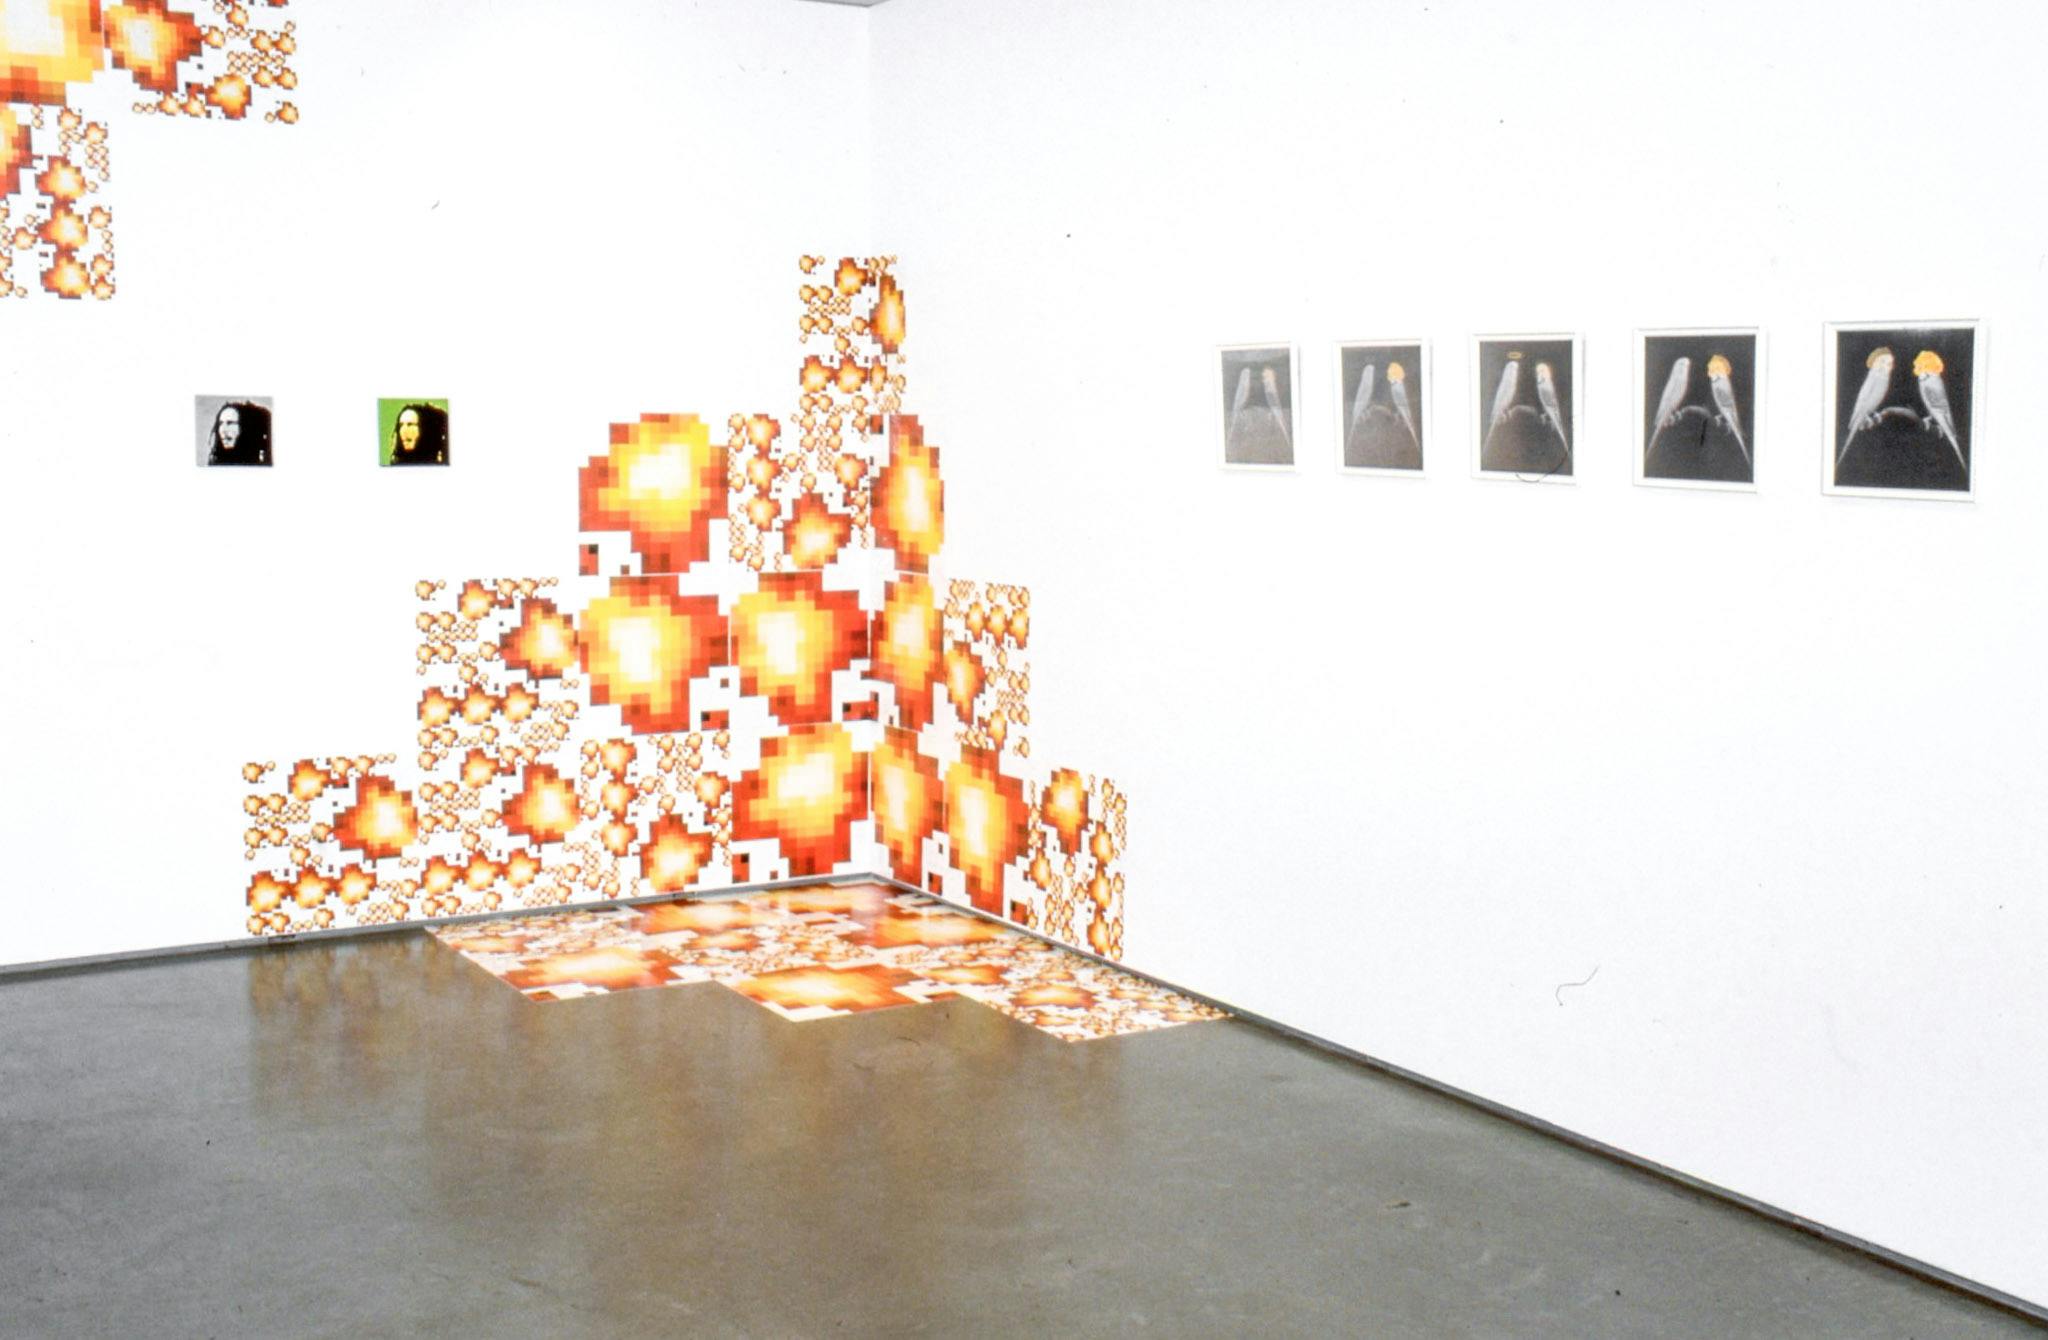 Installation image of works in a gallery. A series of five images of two birds facing each other are mounted on a wall. The corner of the room is partially covered by square pieces of vinyl on which orange-coloured graphic designs are printed.